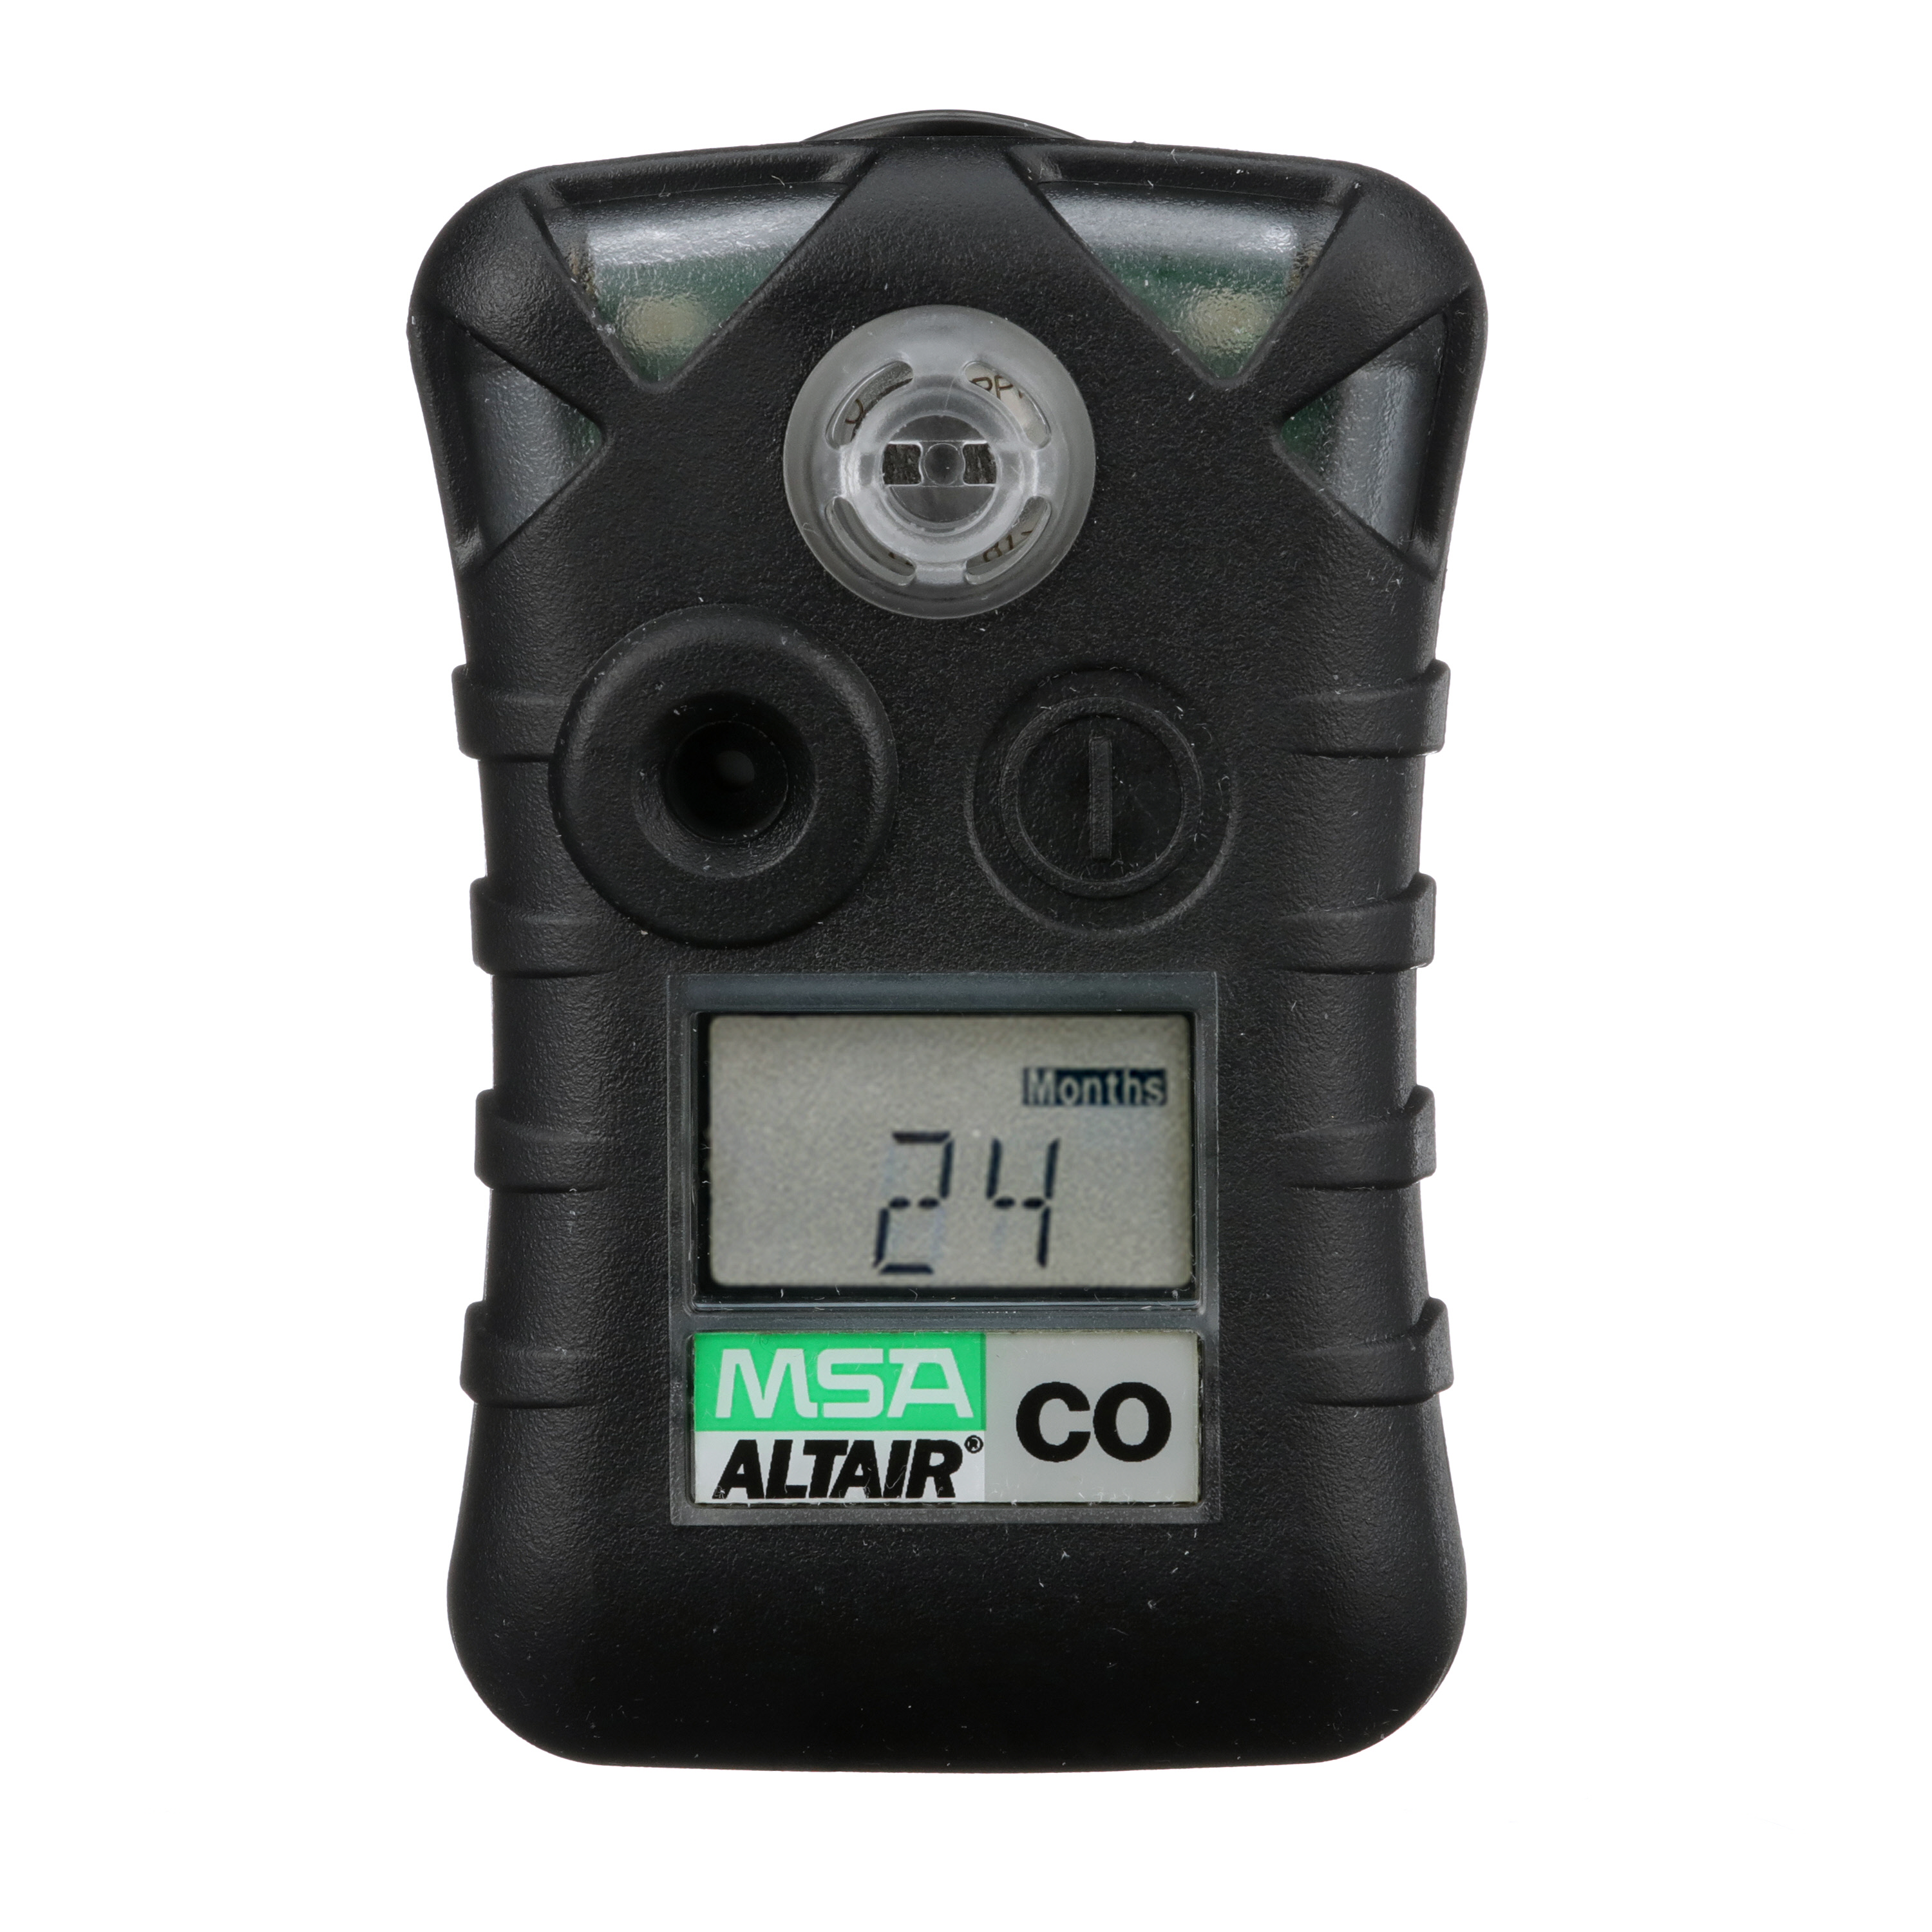 MSA ALTAIR CO GAS DETECTOR - Tagged Gloves